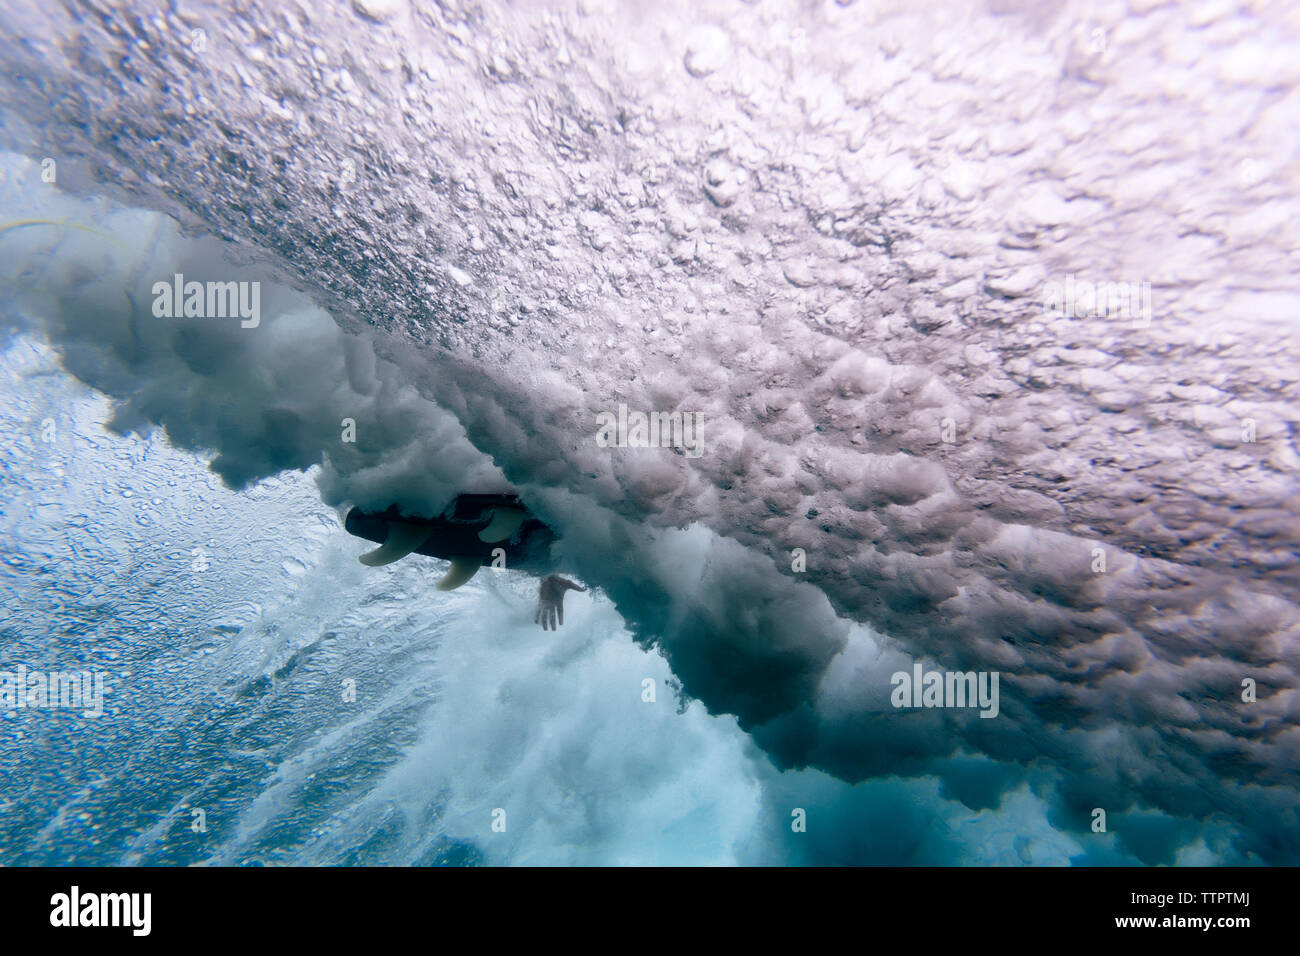 Low angle view of surfboard amidst waves breaking undersea at Maldives Stock Photo